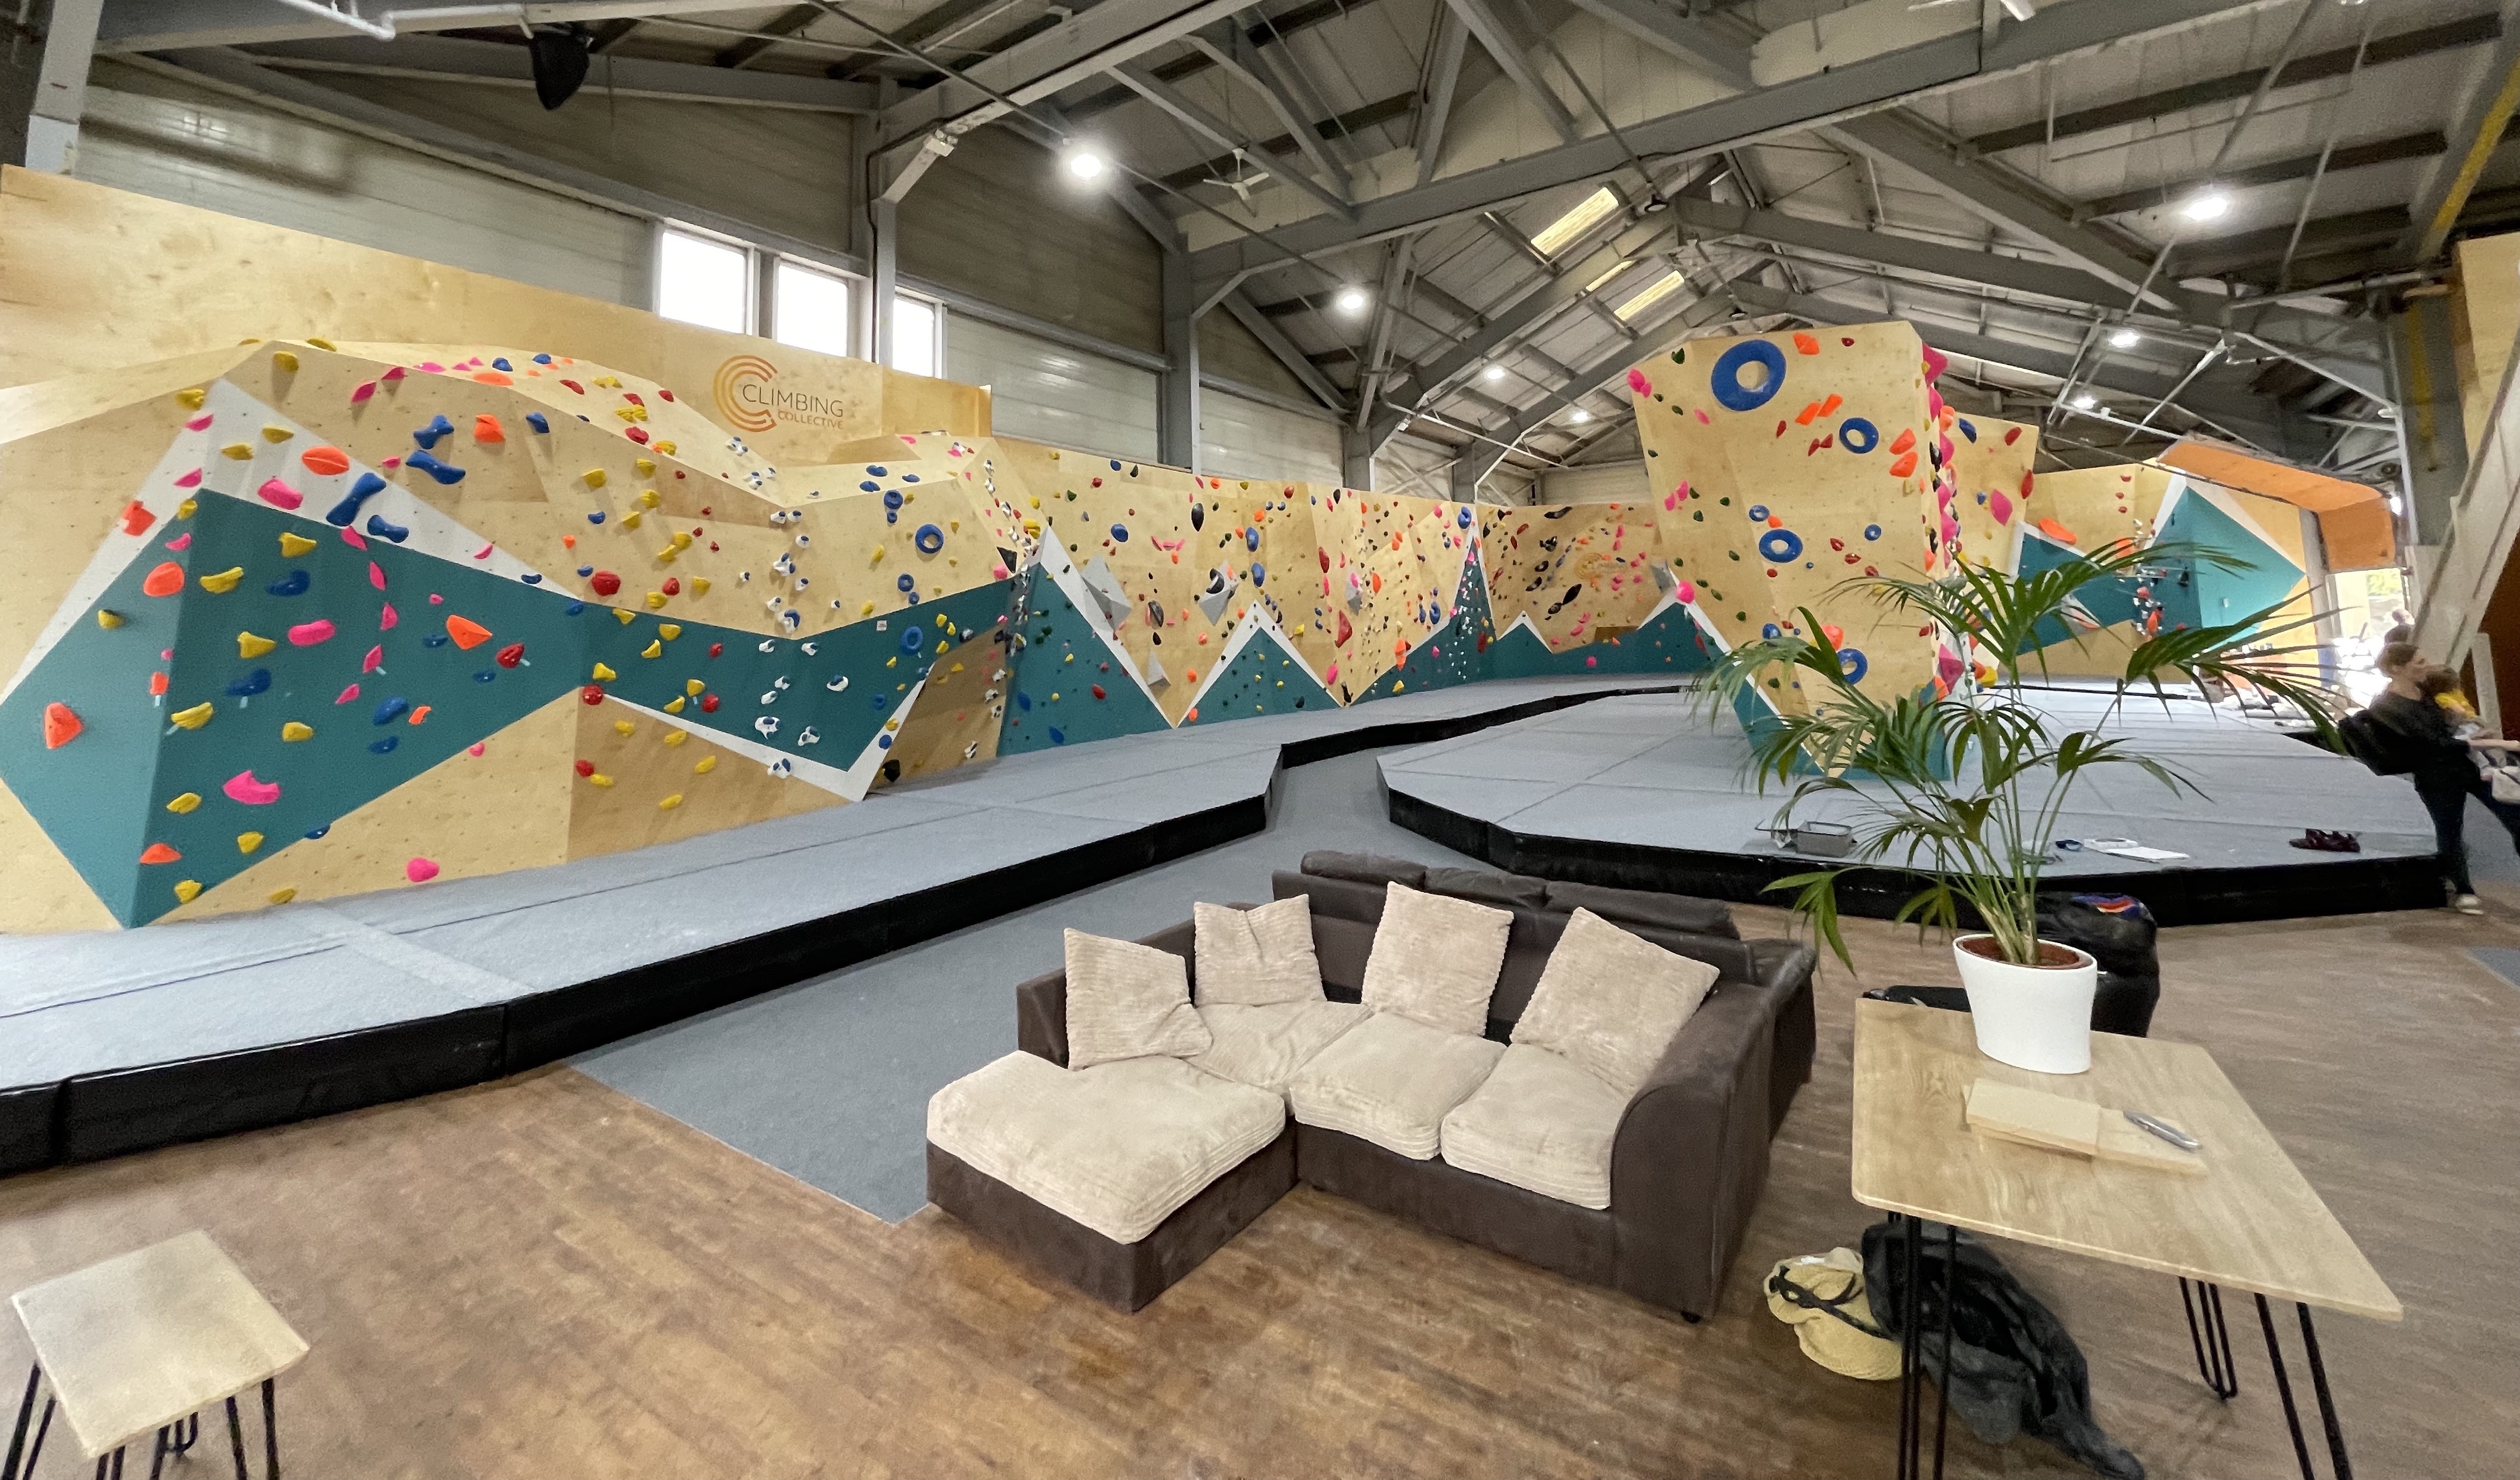 Northway climbing centre in Newbury. Showing good climbing wall angles with professional route setting.